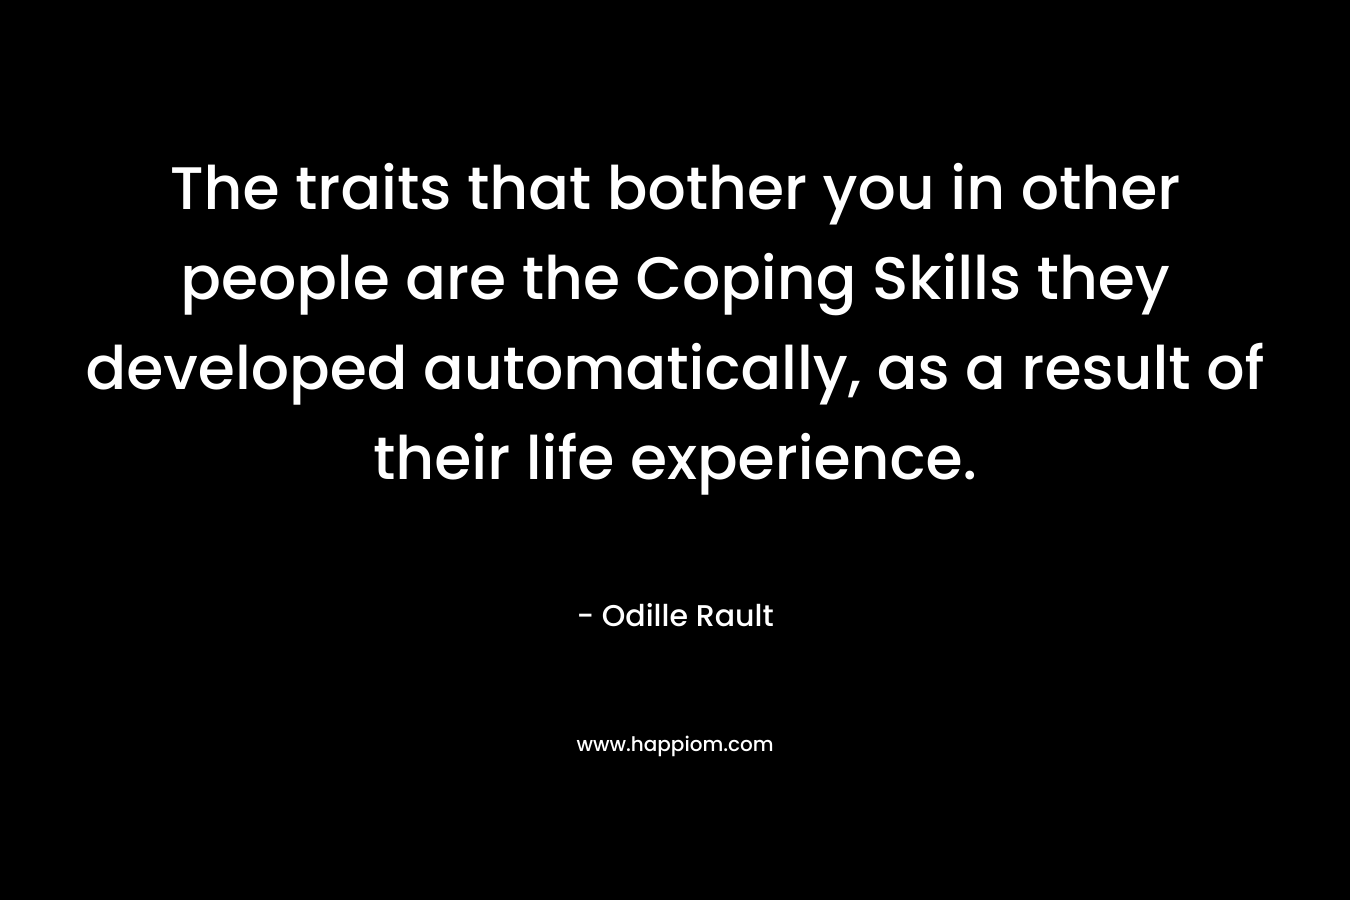 The traits that bother you in other people are the Coping Skills they developed automatically, as a result of their life experience. – Odille Rault